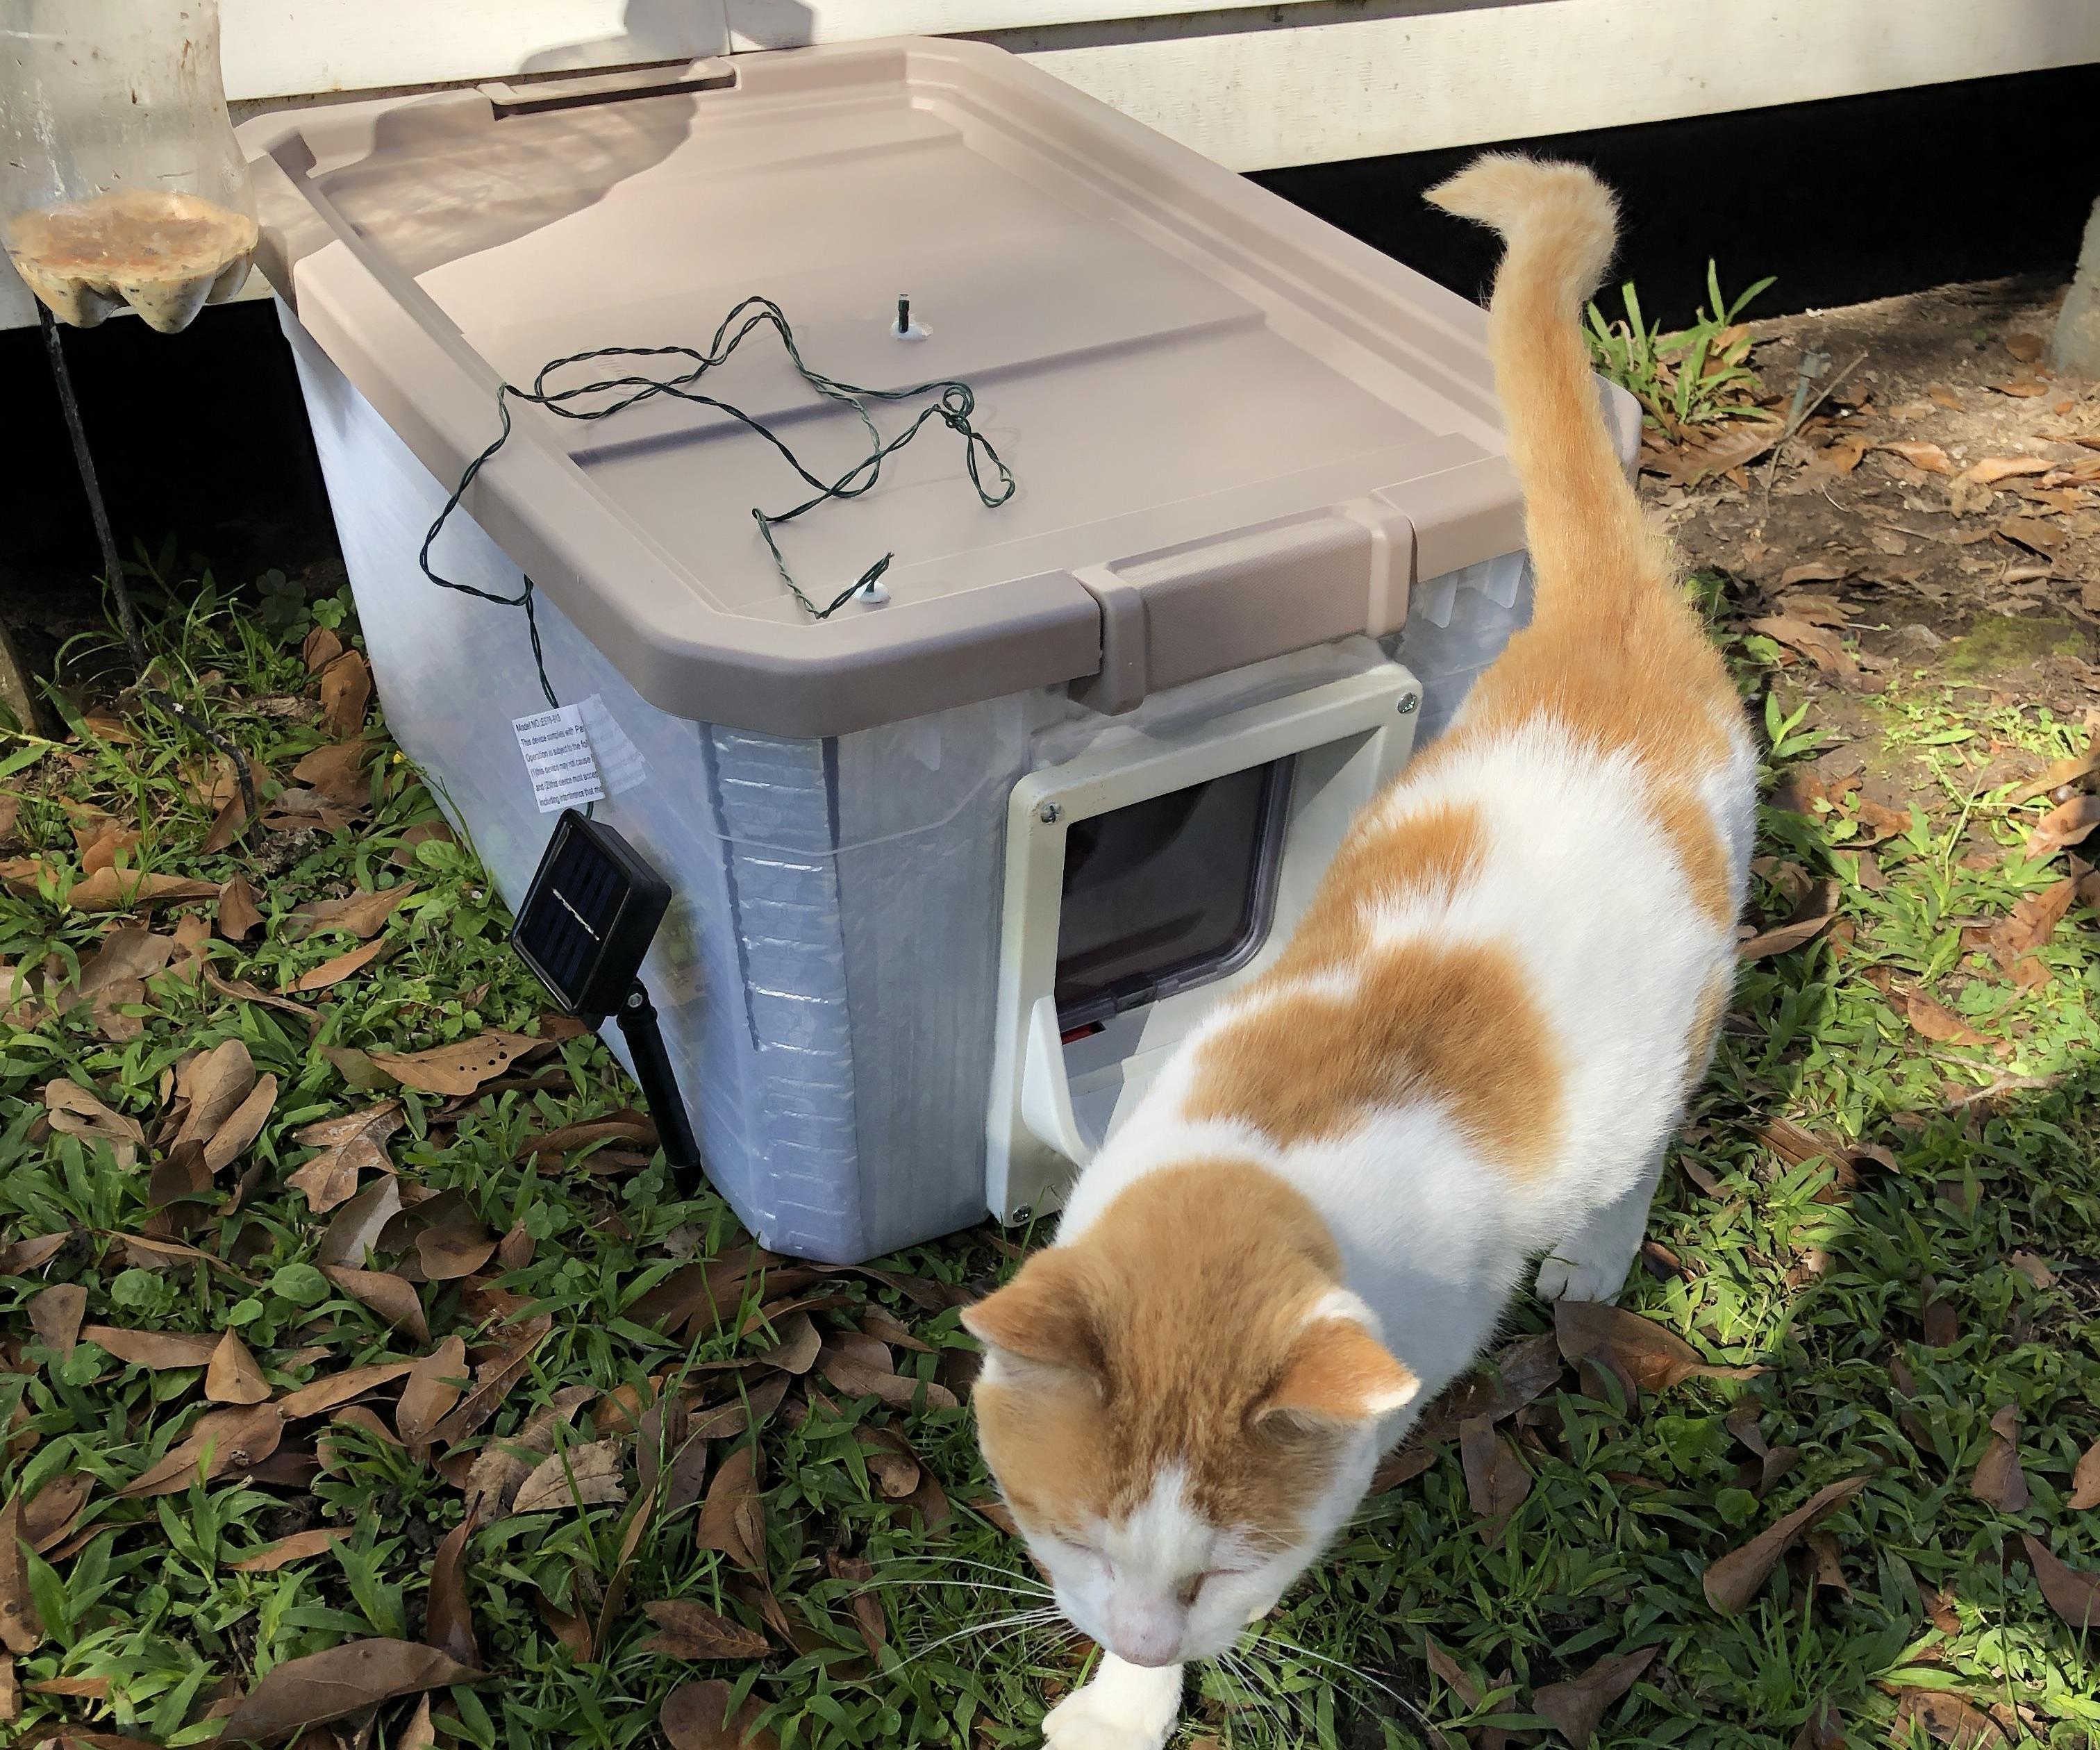 How to Make a Solar Powered Cat House Out of a 19 Gallon Tote